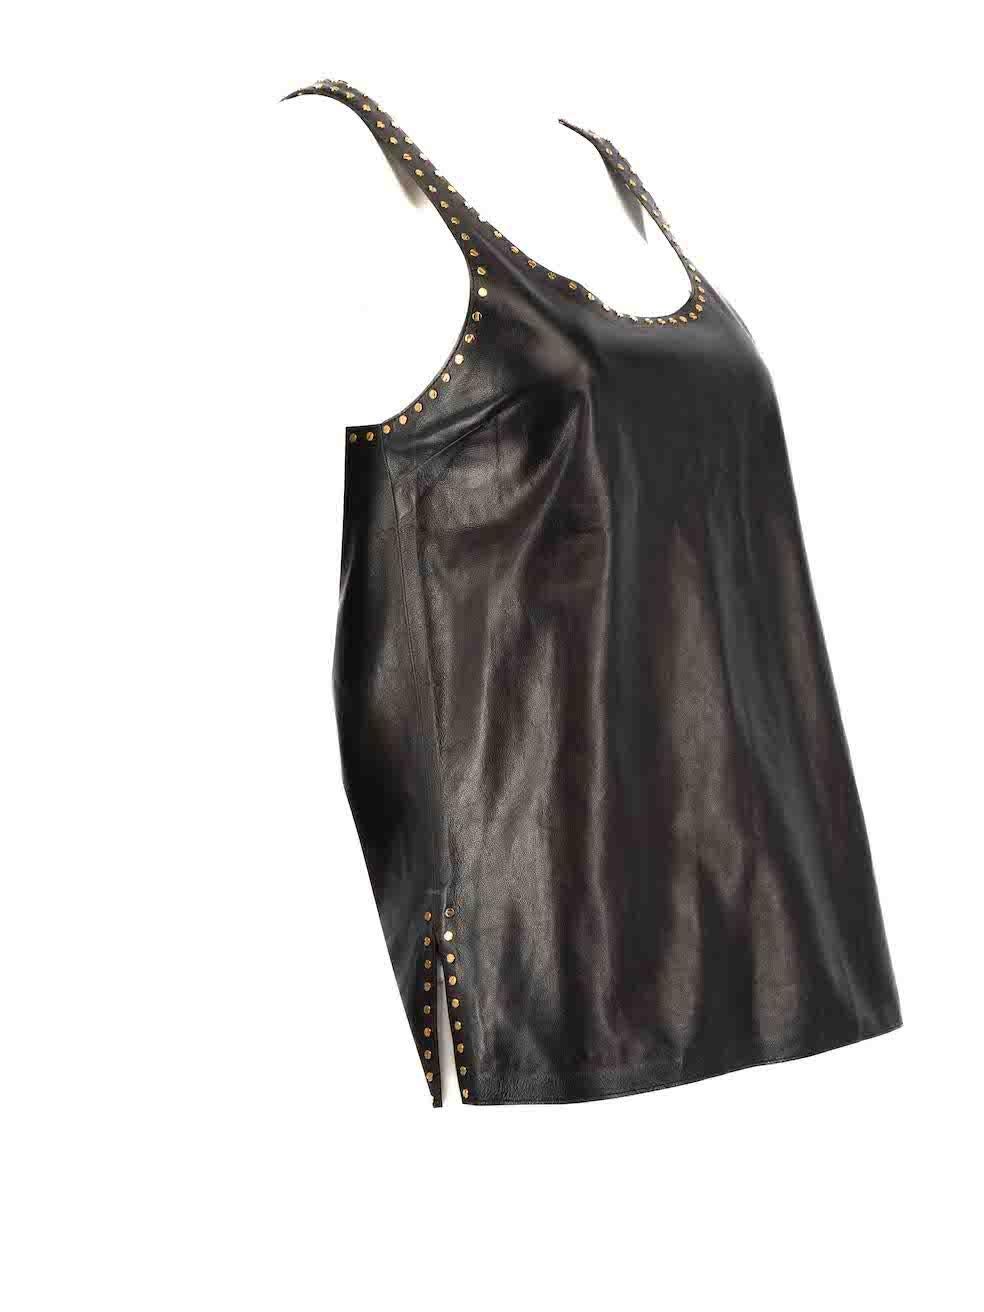 CONDITION is Very good. Minimal wear to top is evident. Minimal wear to the neckline with a faint mark on this used Tom Ford designer resale item.
 
 Details
 Black
 Leather
 Tank top
 Sleeveless
 Scoop neckline
 Studded accent
 Side slits
 
 
 Made